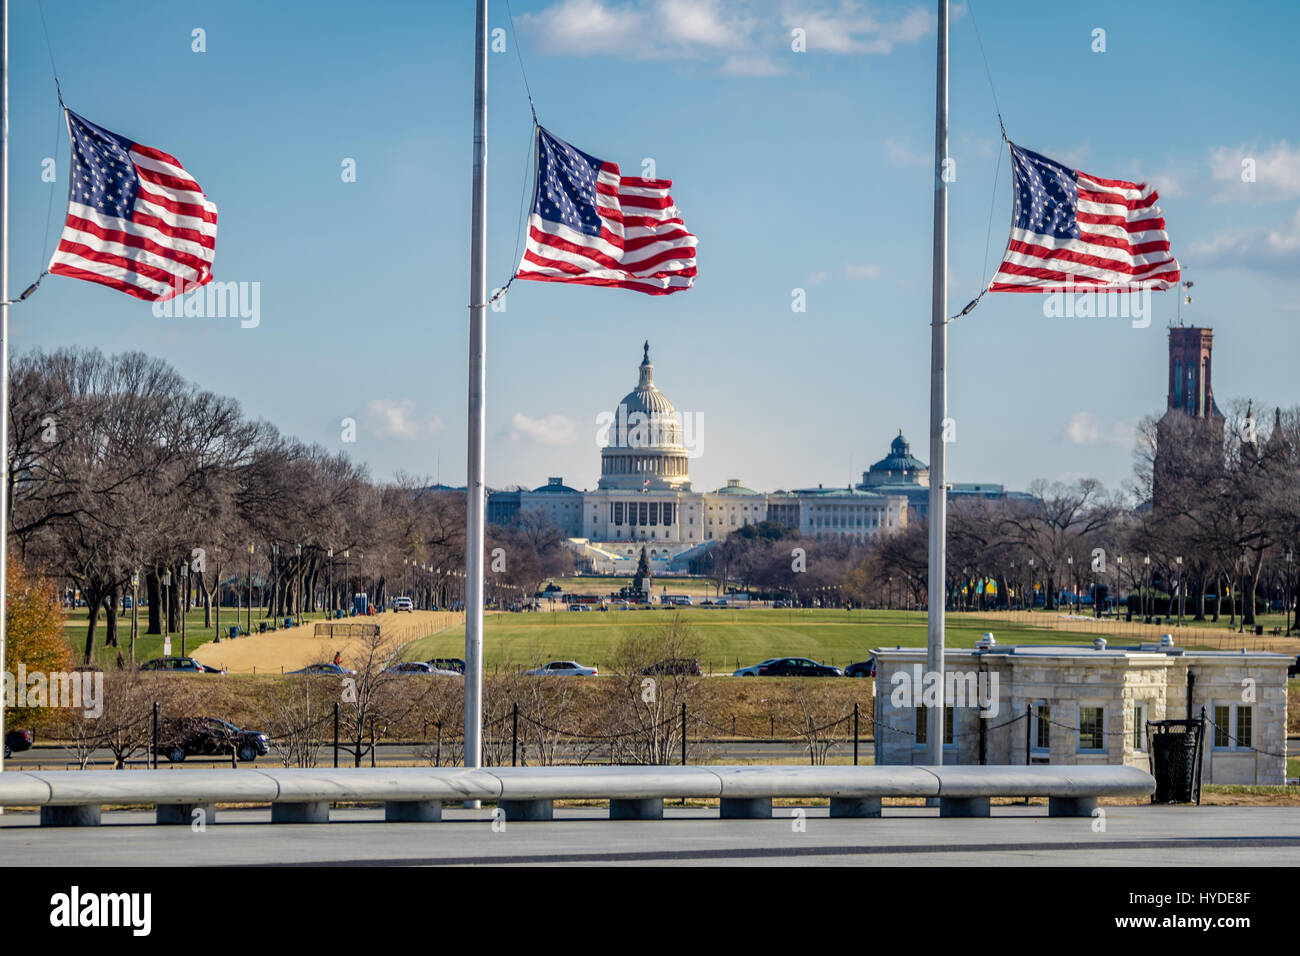 American Flags with US Capitol on background - Washington, D.C., USA Stock Photo